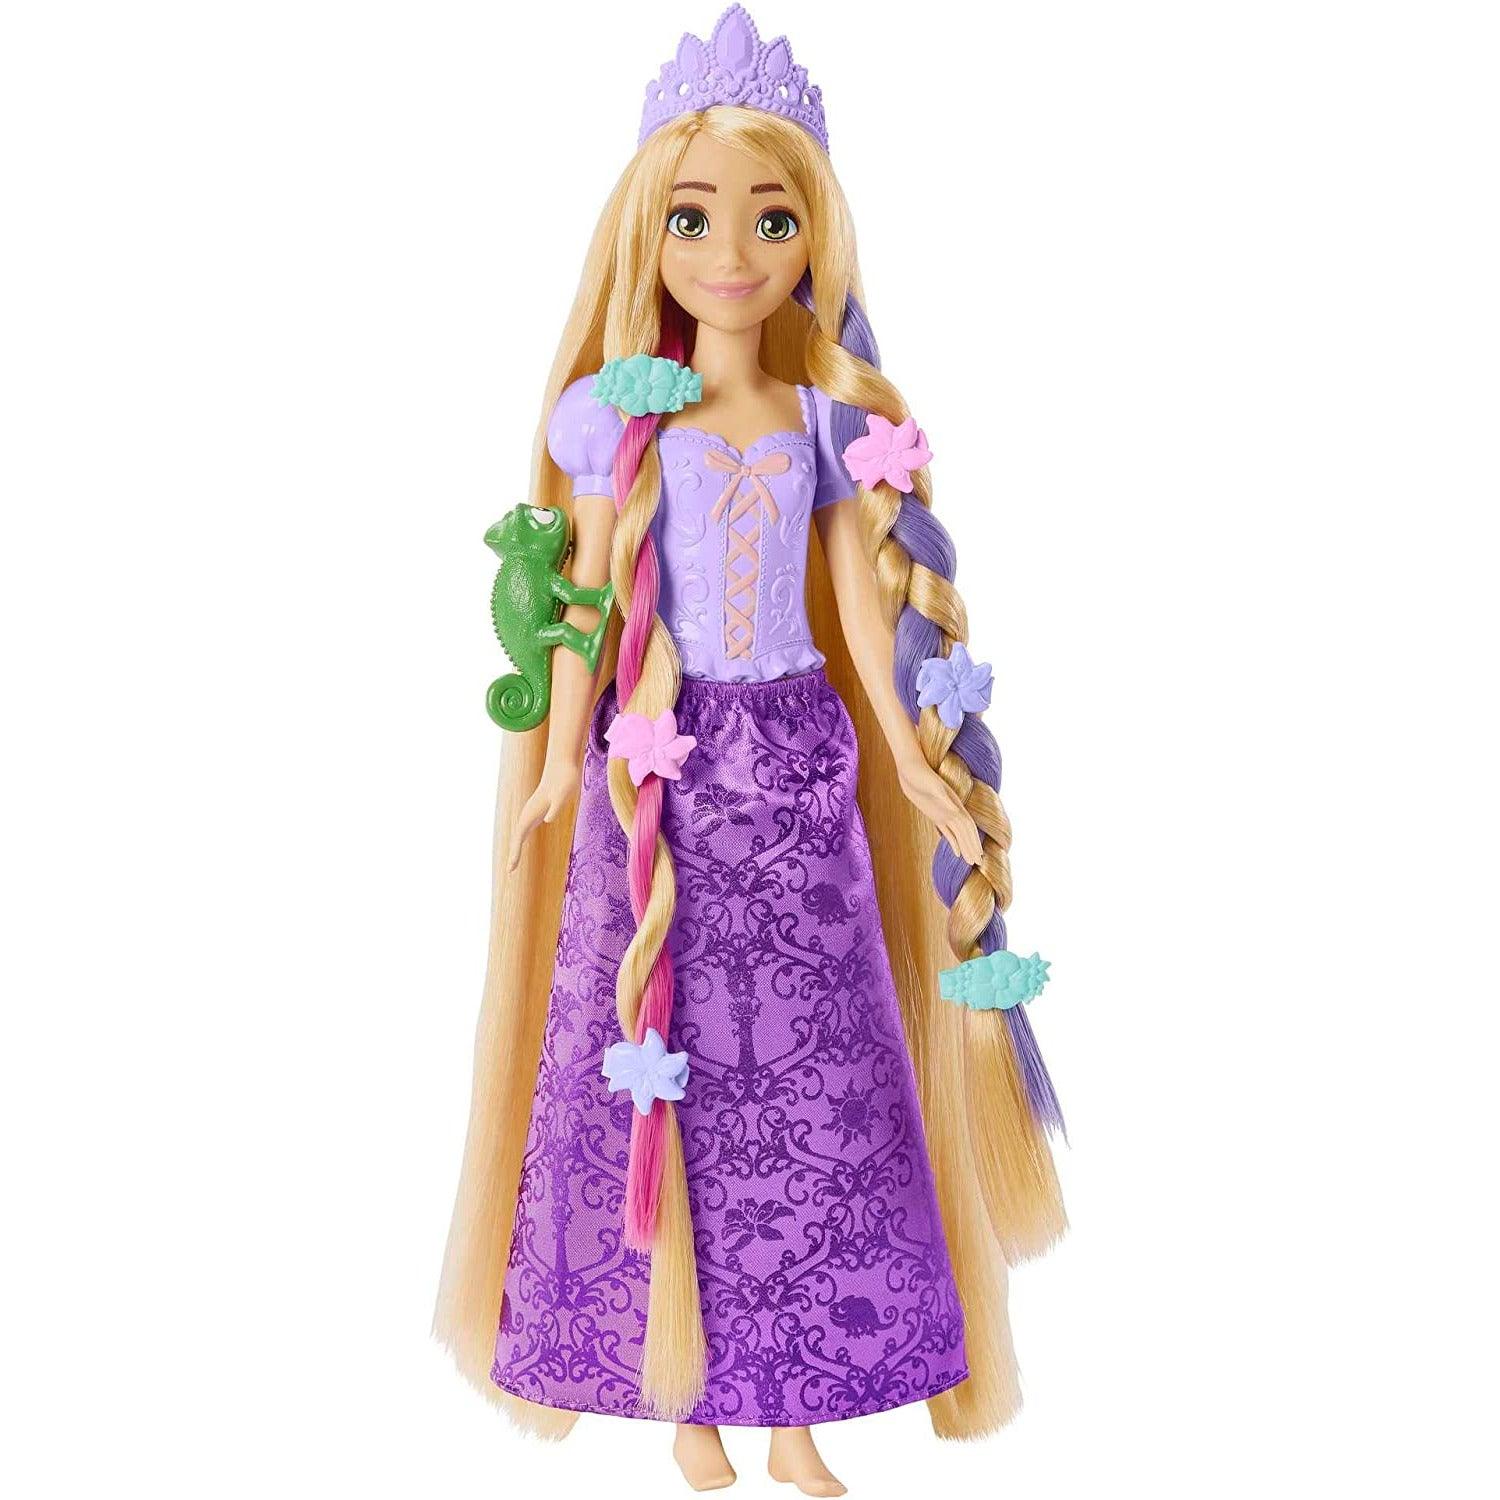 Mattel Disney Princess Rapunzel Fashion Doll with Long Fairy-Tale Hair, 2 Color-Change Hair Extensions & 10 Hairstyling Pieces - BumbleToys - 5-7 Years, Boys, Disney Princess, Fashion Dolls & Accessories, Girls, Pre-Order